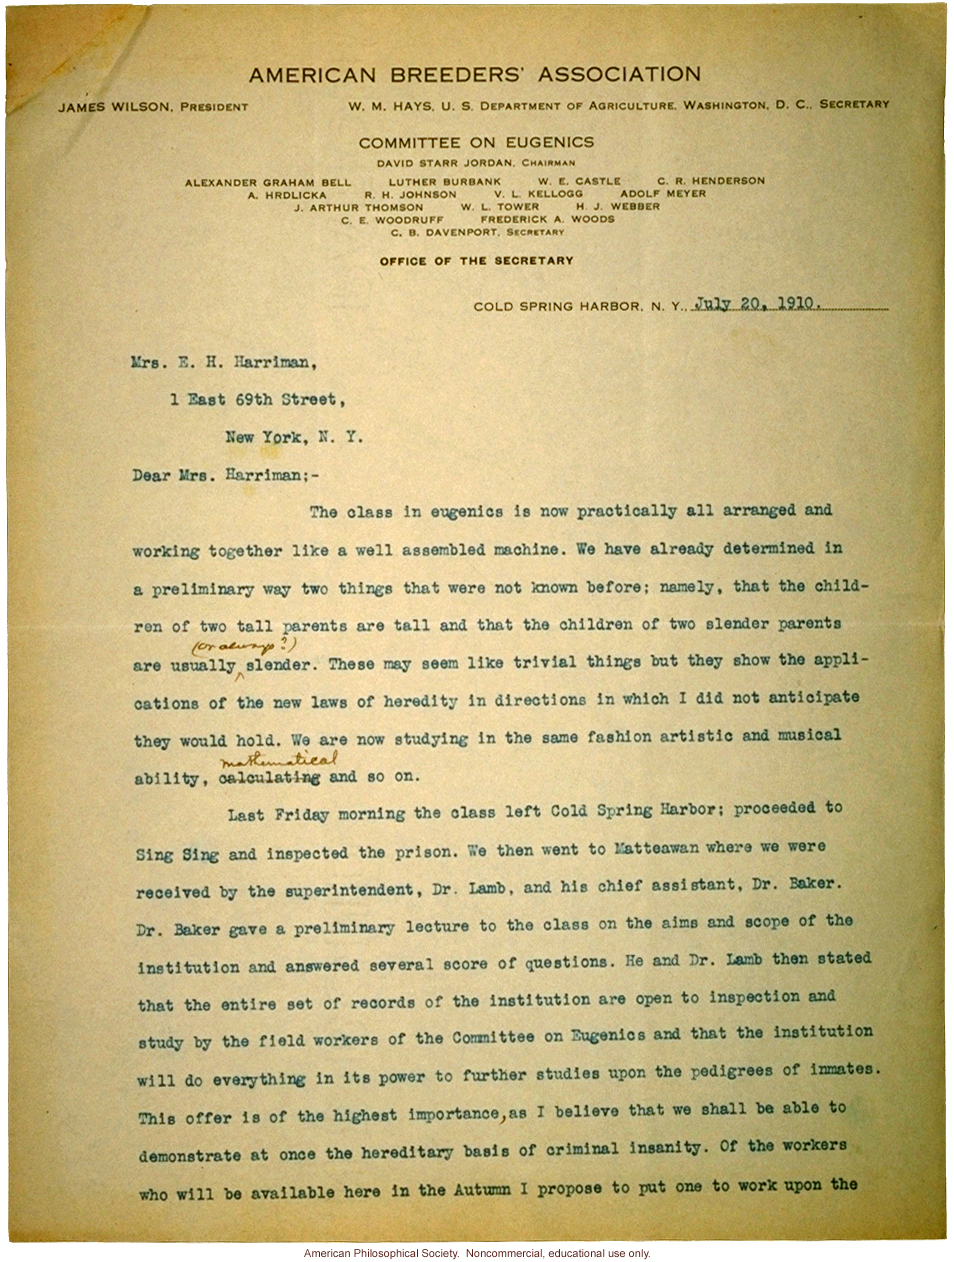 Charles Davenport letter to Mrs. E.H. Harriman about recruitment of first class